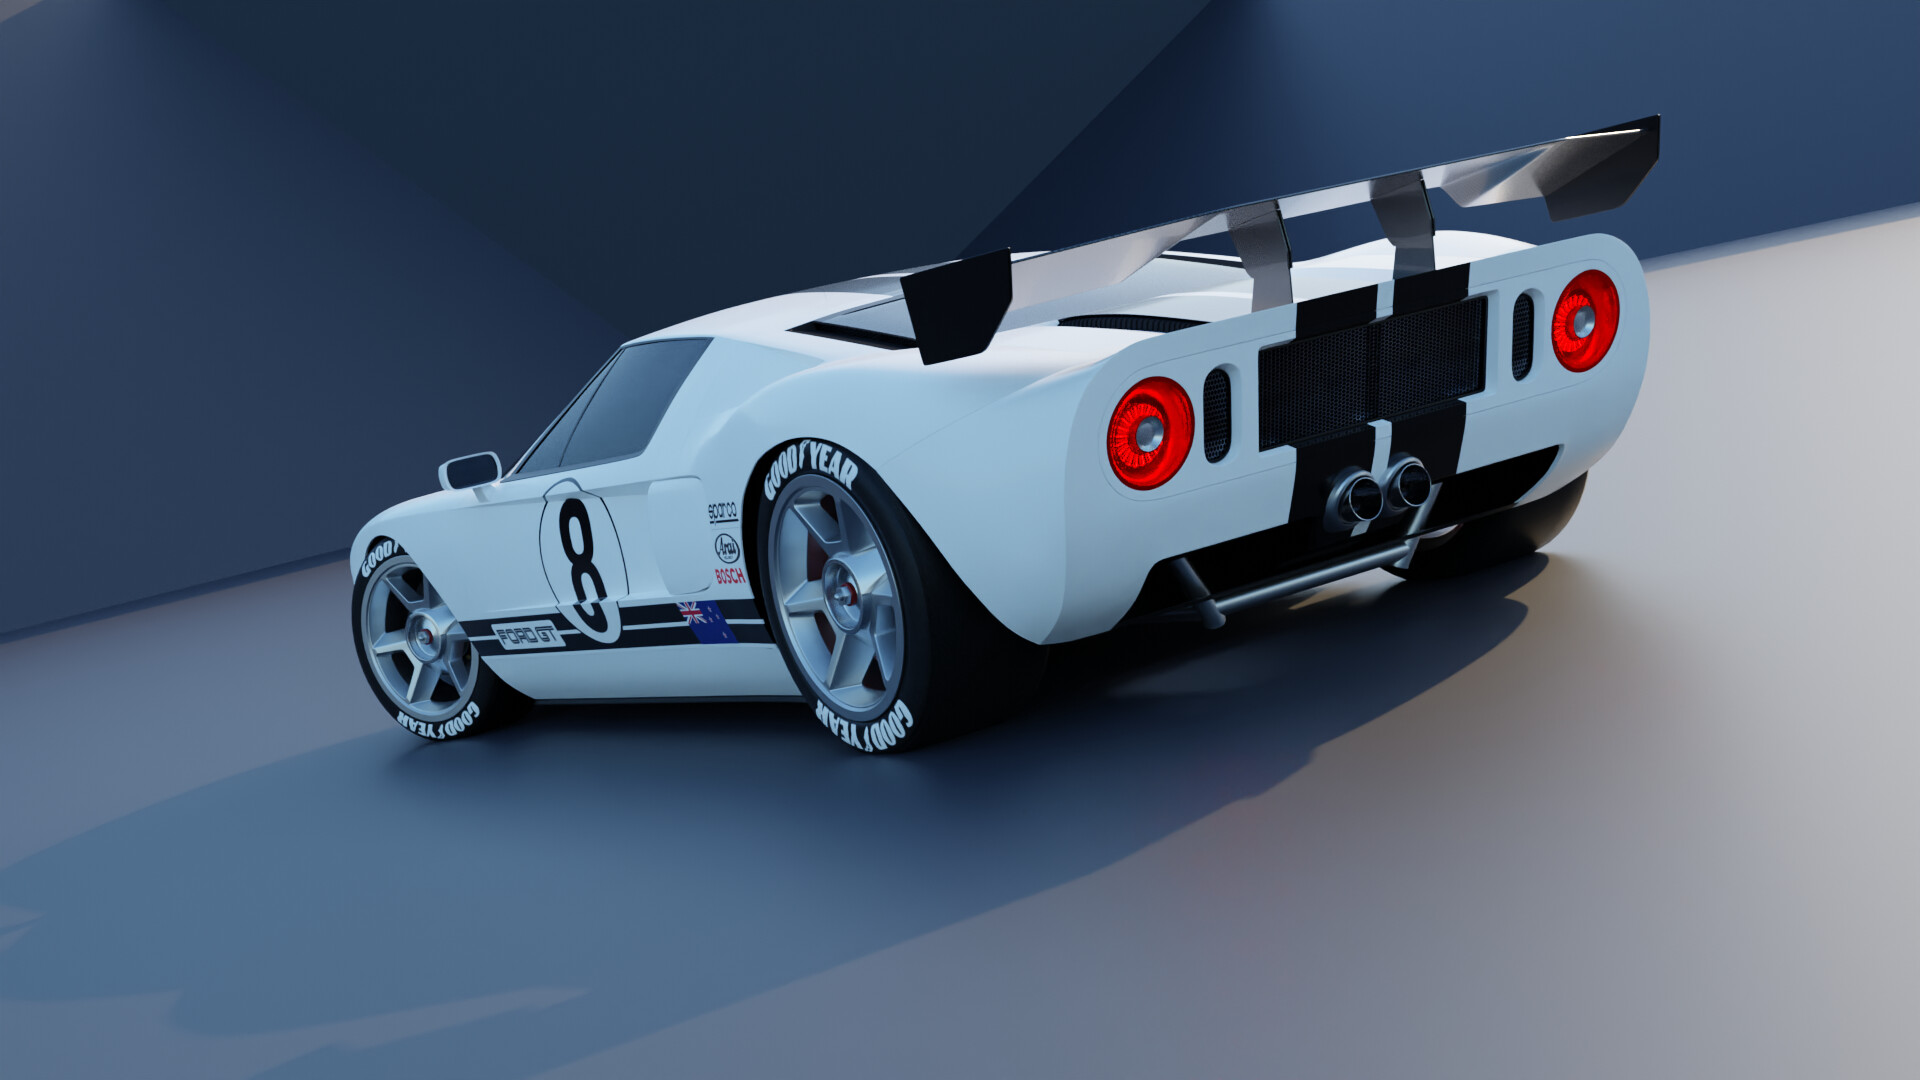 Ford GT LM 2016 Race Car Spec II by srlangui on DeviantArt